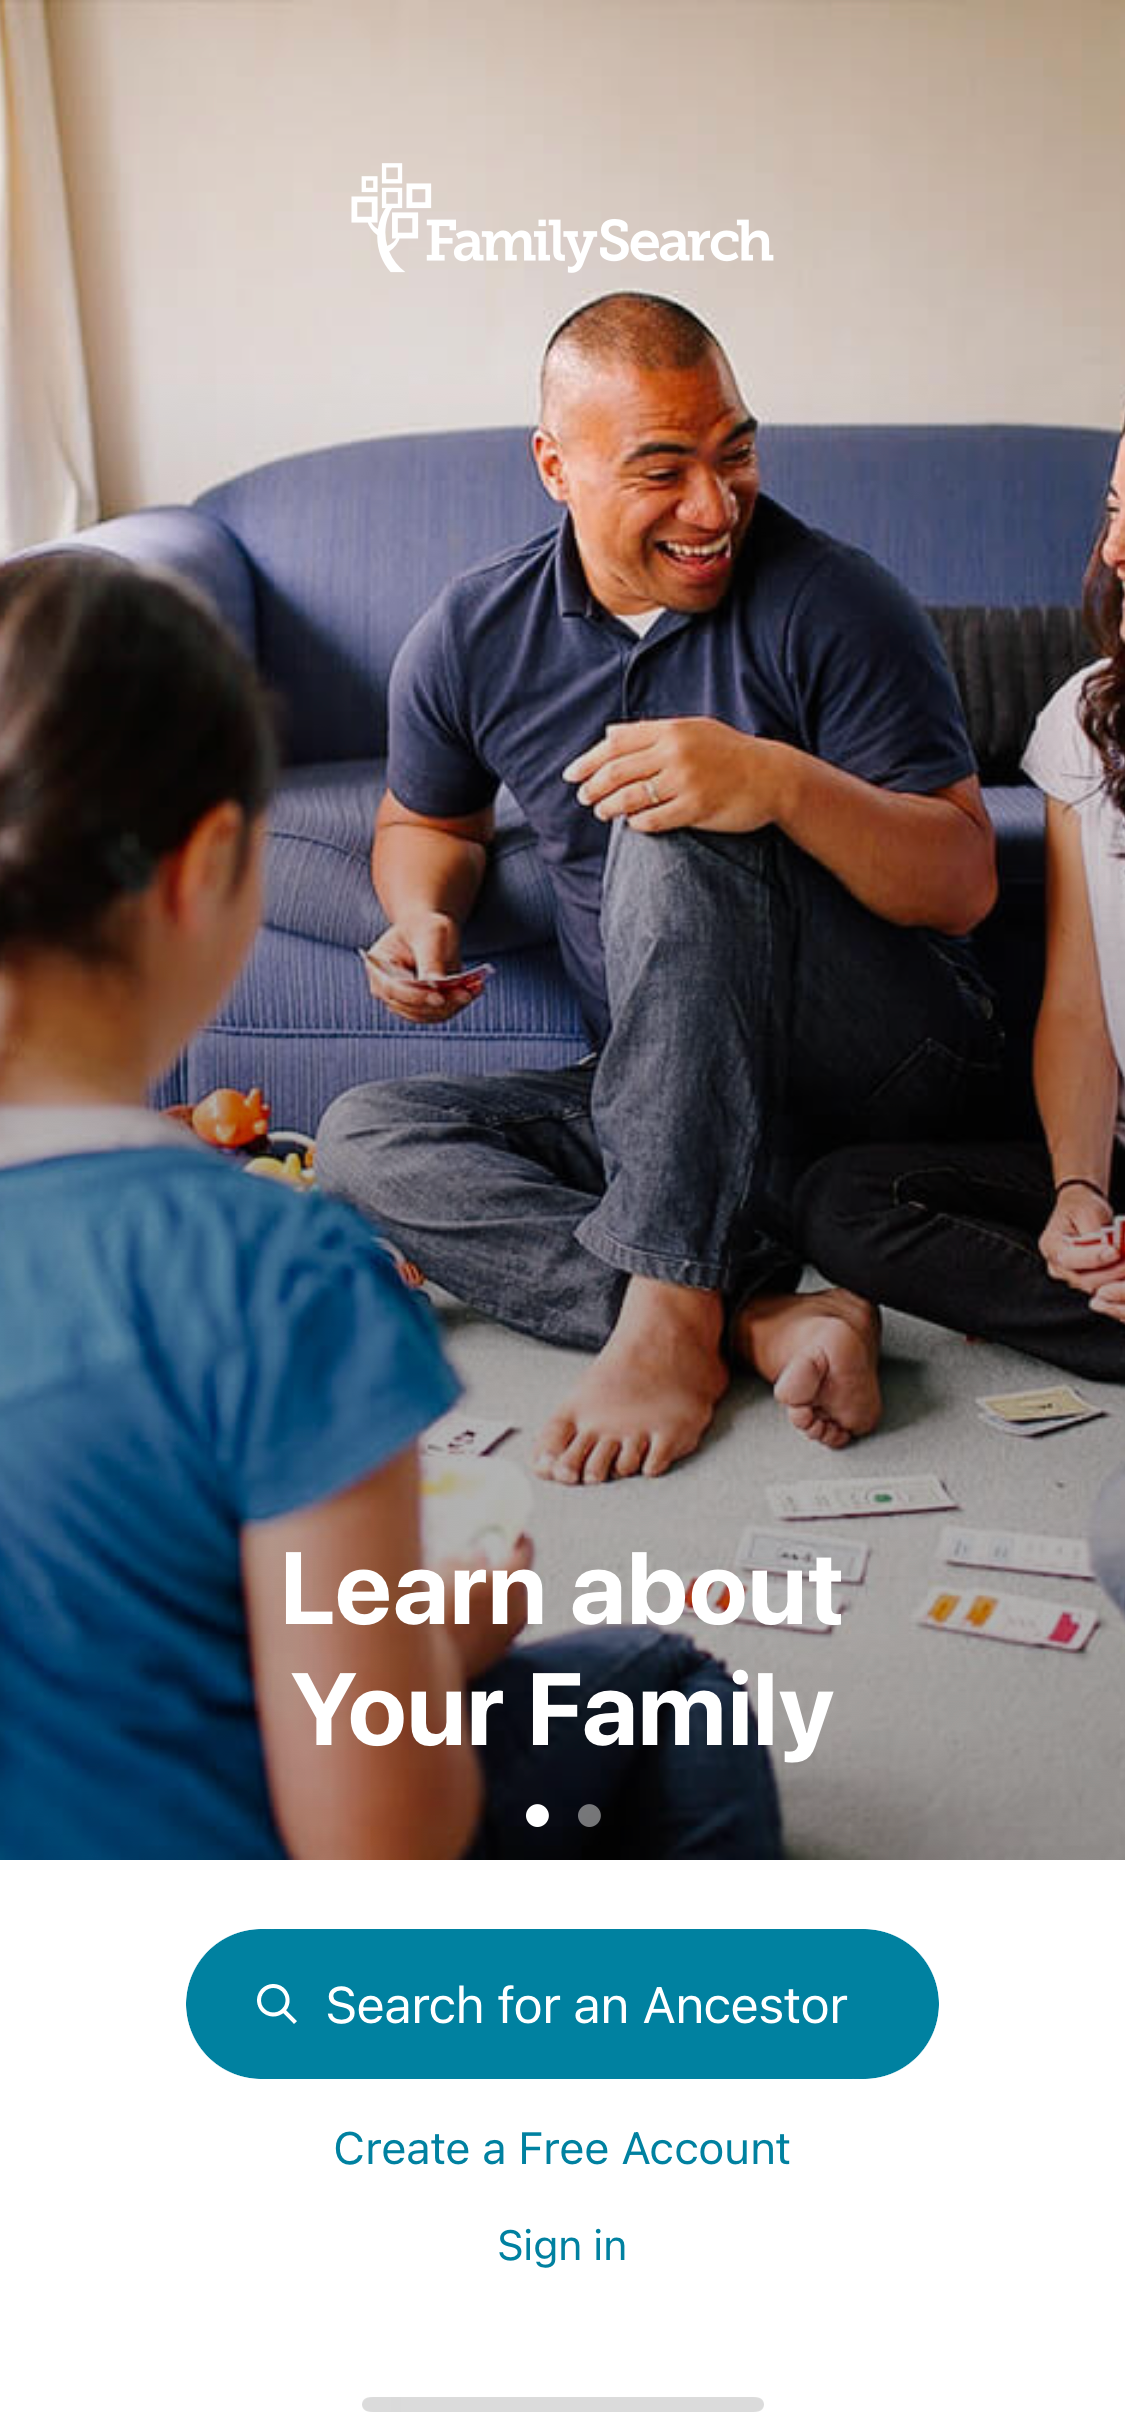 familysearch home